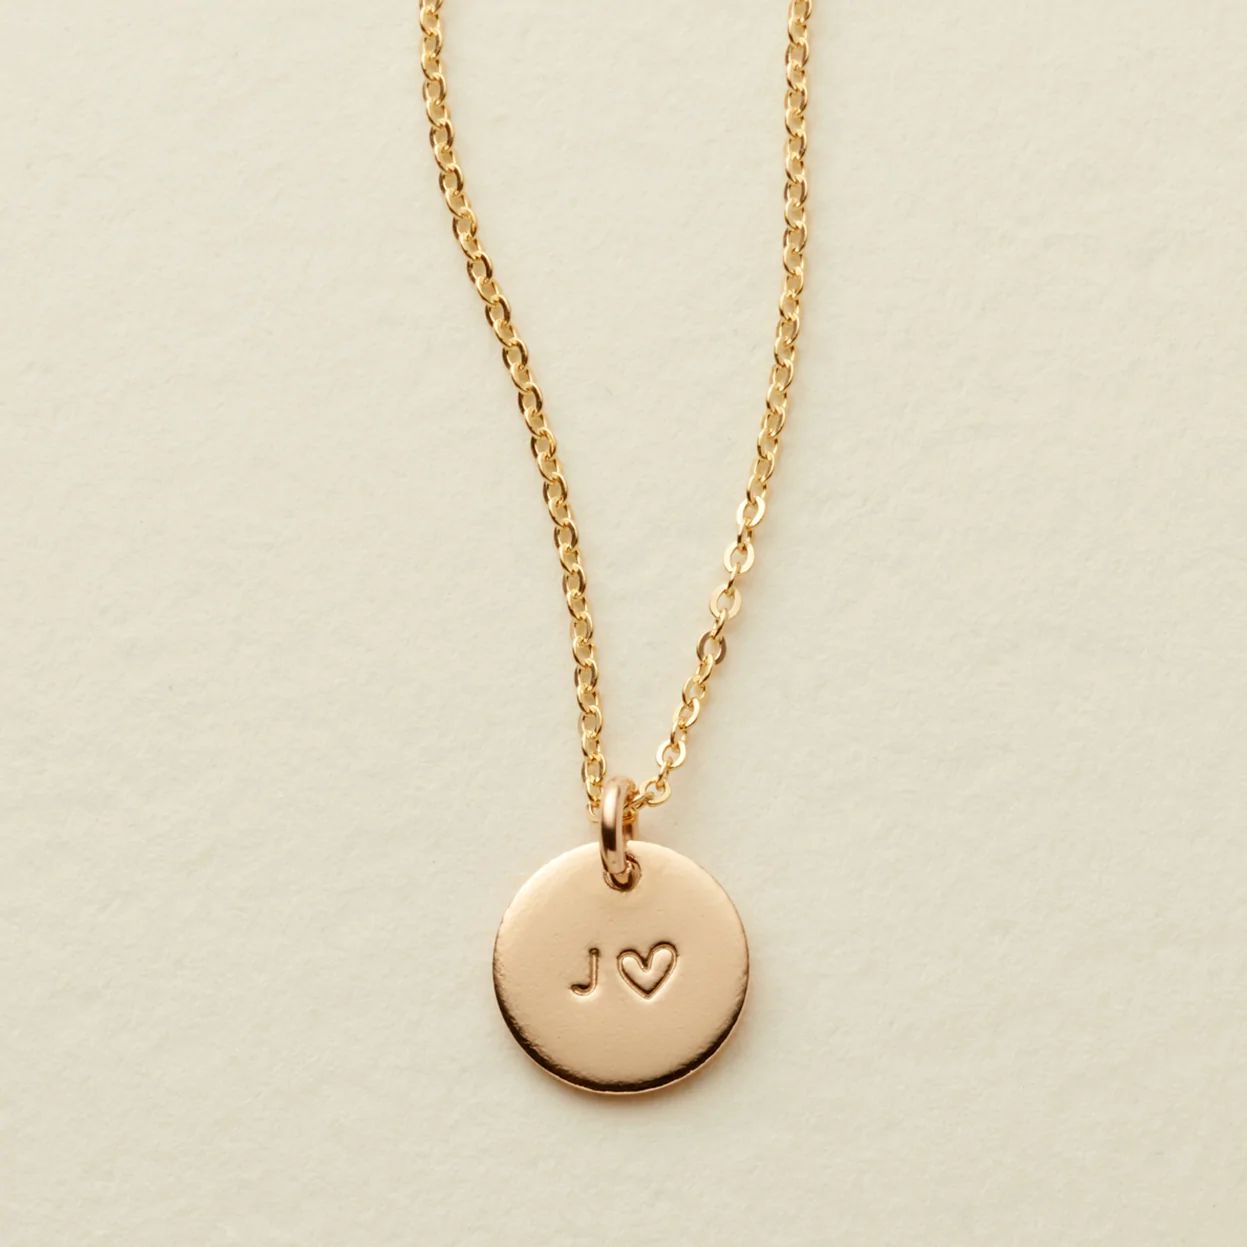 Amore Disc Necklace | Made by Mary (US)